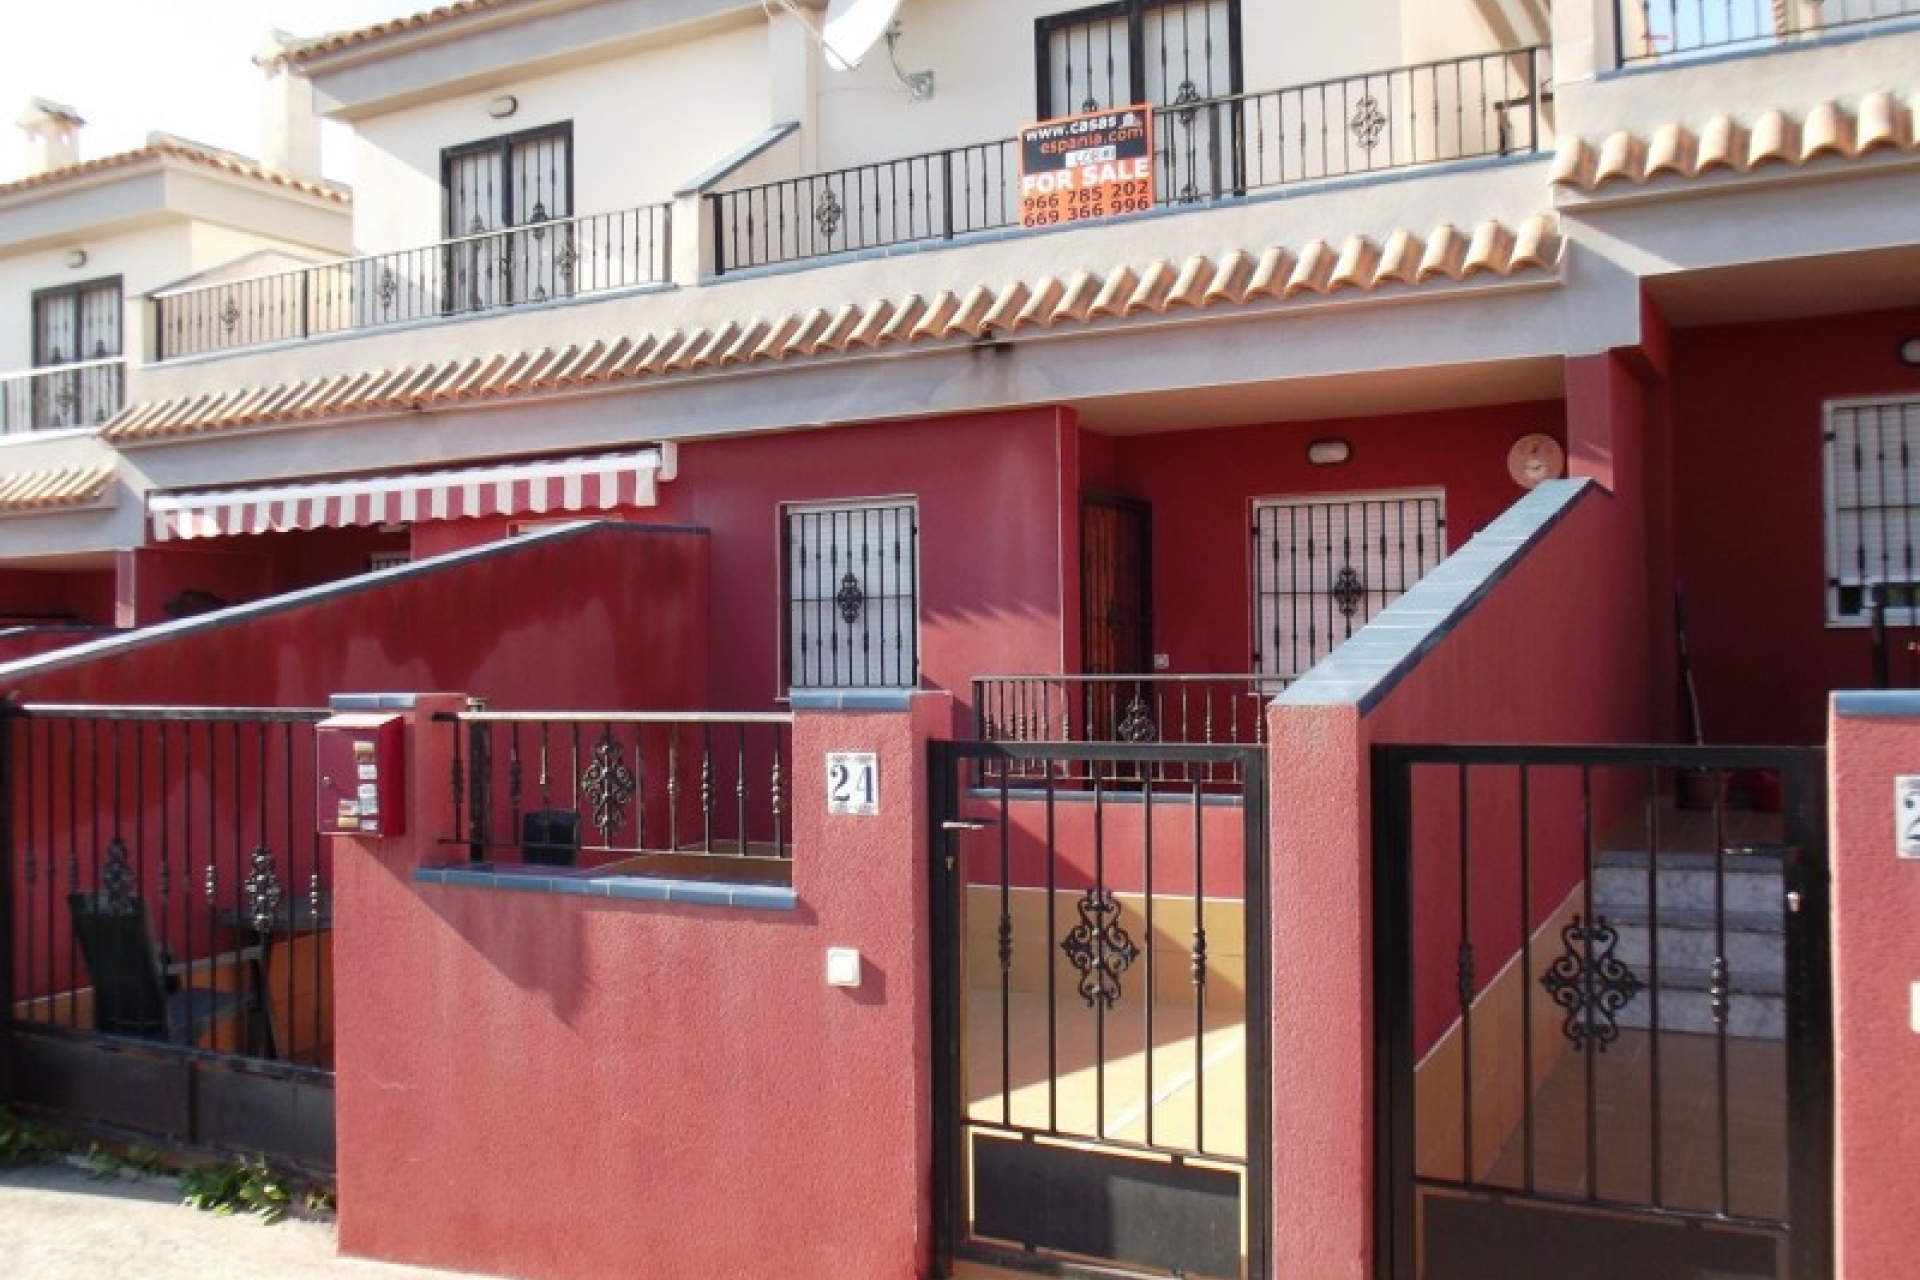 For sale in Aguas Nueva, cheap, bargain porperty close to Torrevieja and Guardamar on Spains Costa Blanca